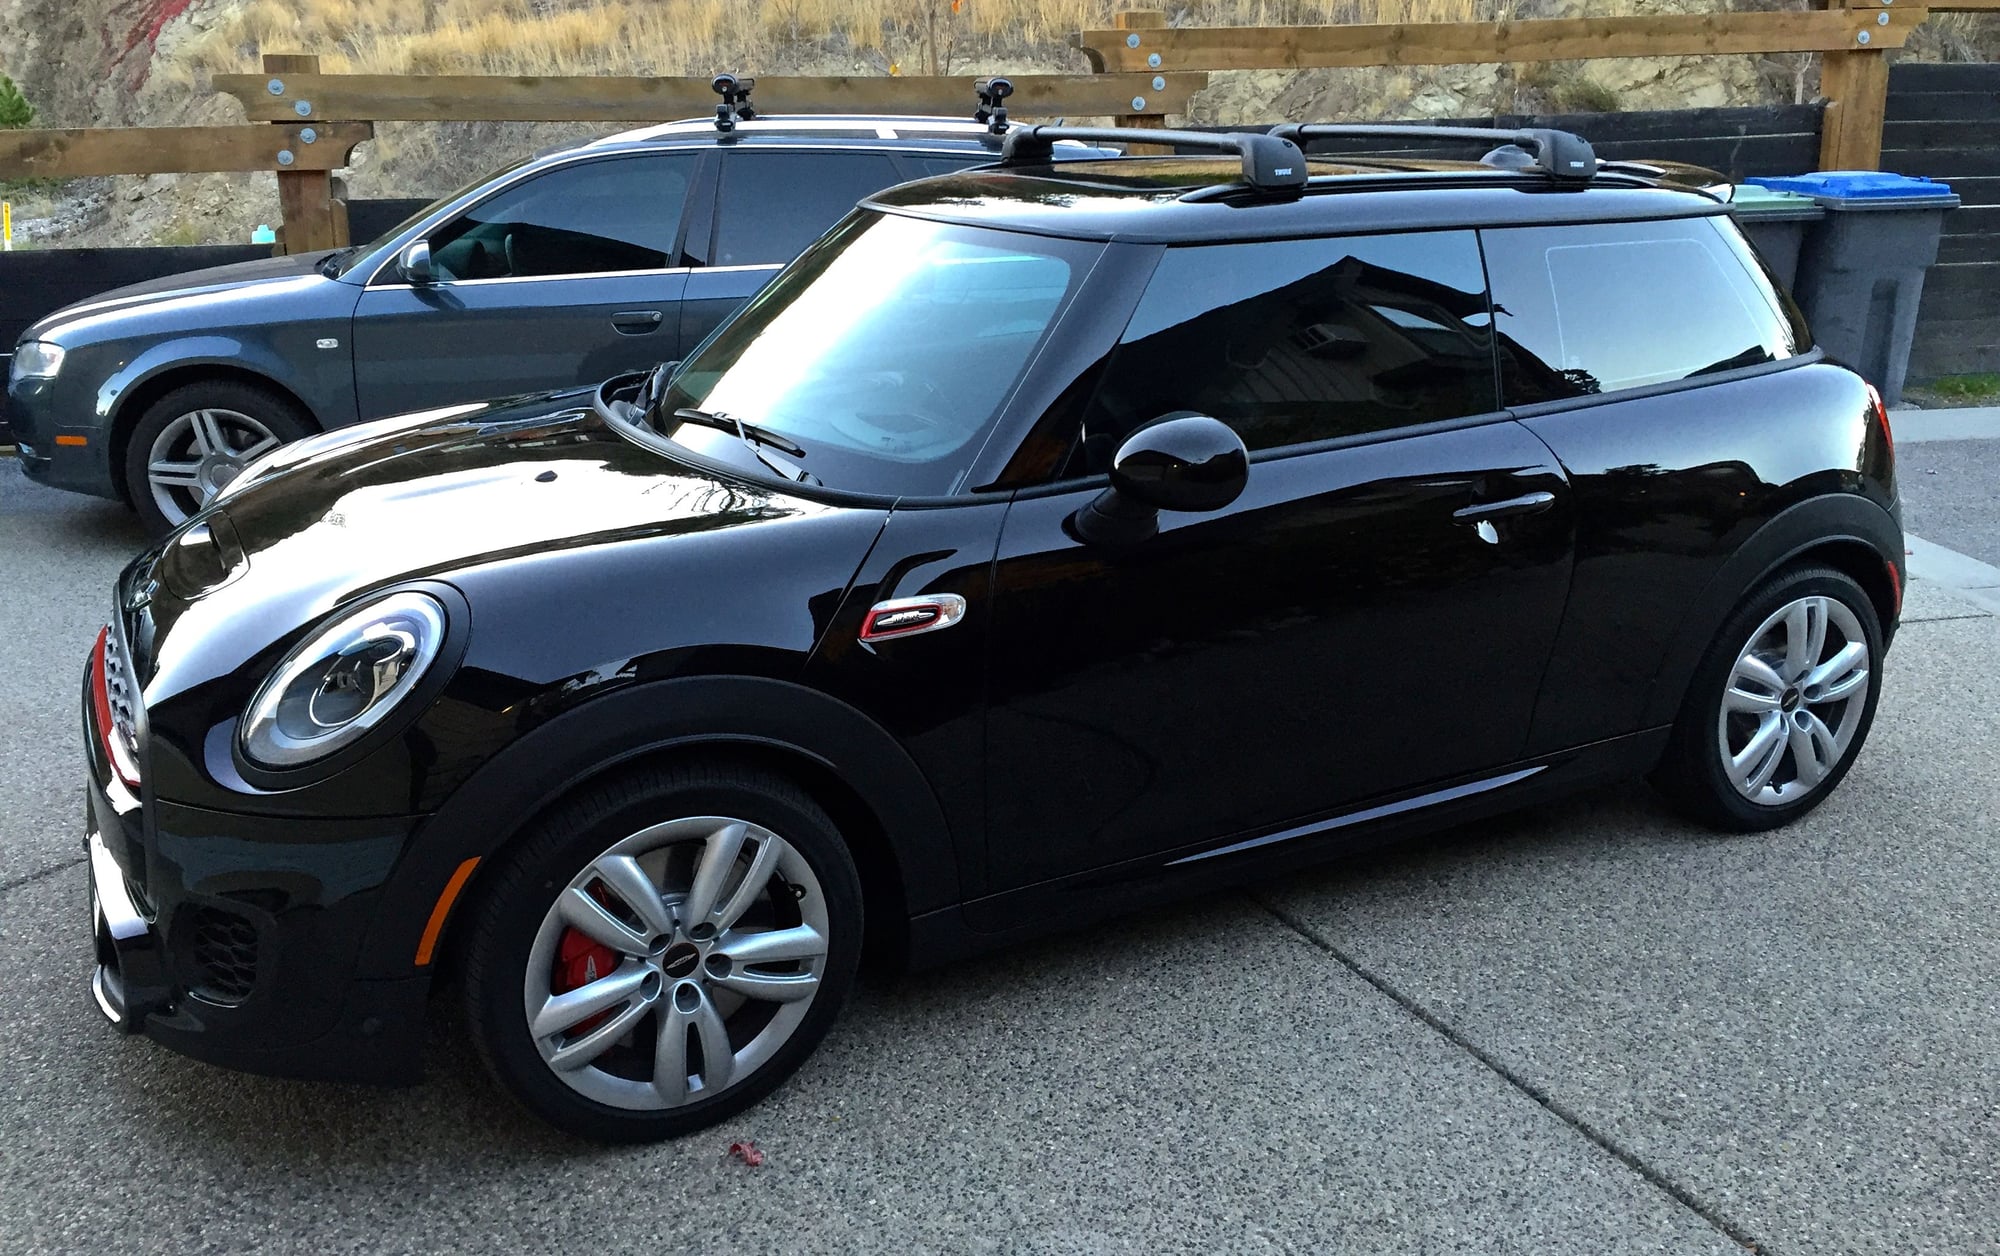 JCW Black cars look better in the shade... - North American Motoring